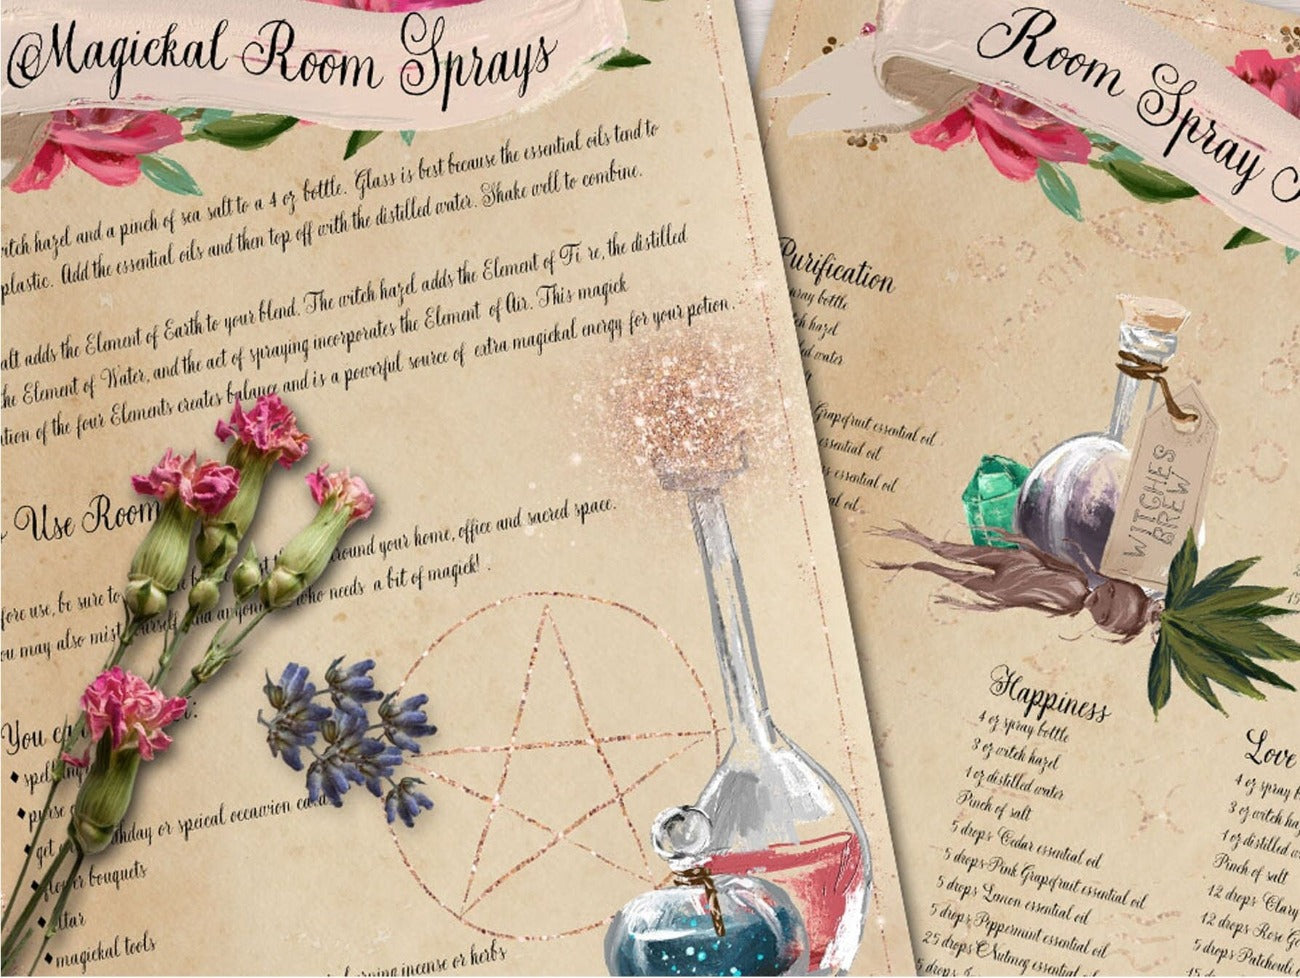 MAGIC ROOM SPRAYS, close up view of How to Make and Use Wicca Witchcraft room fresheners - Morgana Magick Spell